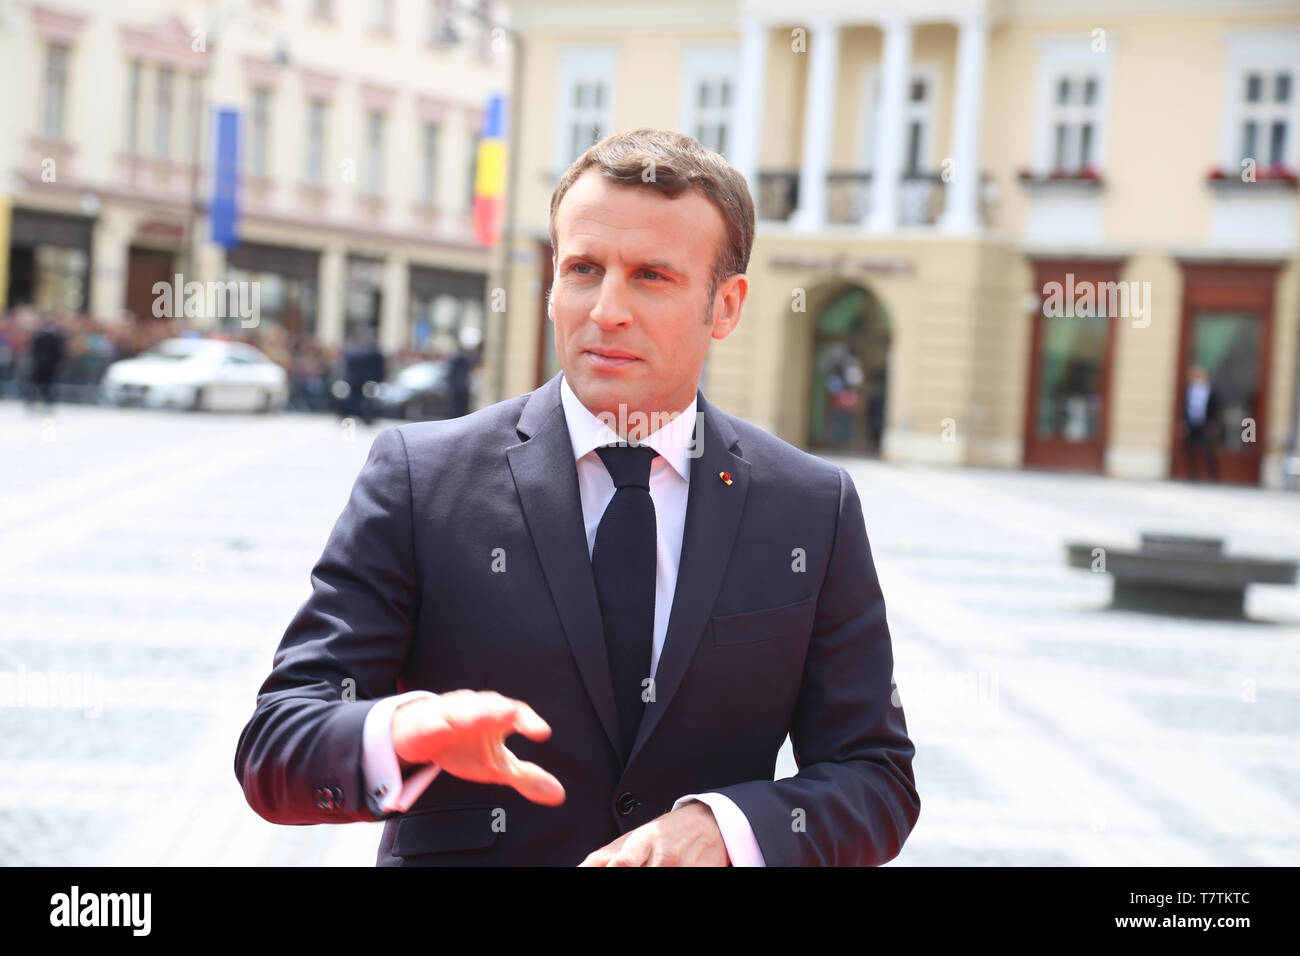 Sibiu, Romania. 9th May, 2019. French President Emmanuel Macron arrives in the Grand Square in front of the Sibiu City Hall to attend the European Union (EU) informal summit in Sibiu, Romania, May 9, 2019. The leaders of the EU member states on Thursday agreed on defending 'one Europe' and upholding the rules-based international order in their '10 commitments' declaration, made at an informal summit in Sibiu. Credit: Chen Jin/Xinhua/Alamy Live News Stock Photo